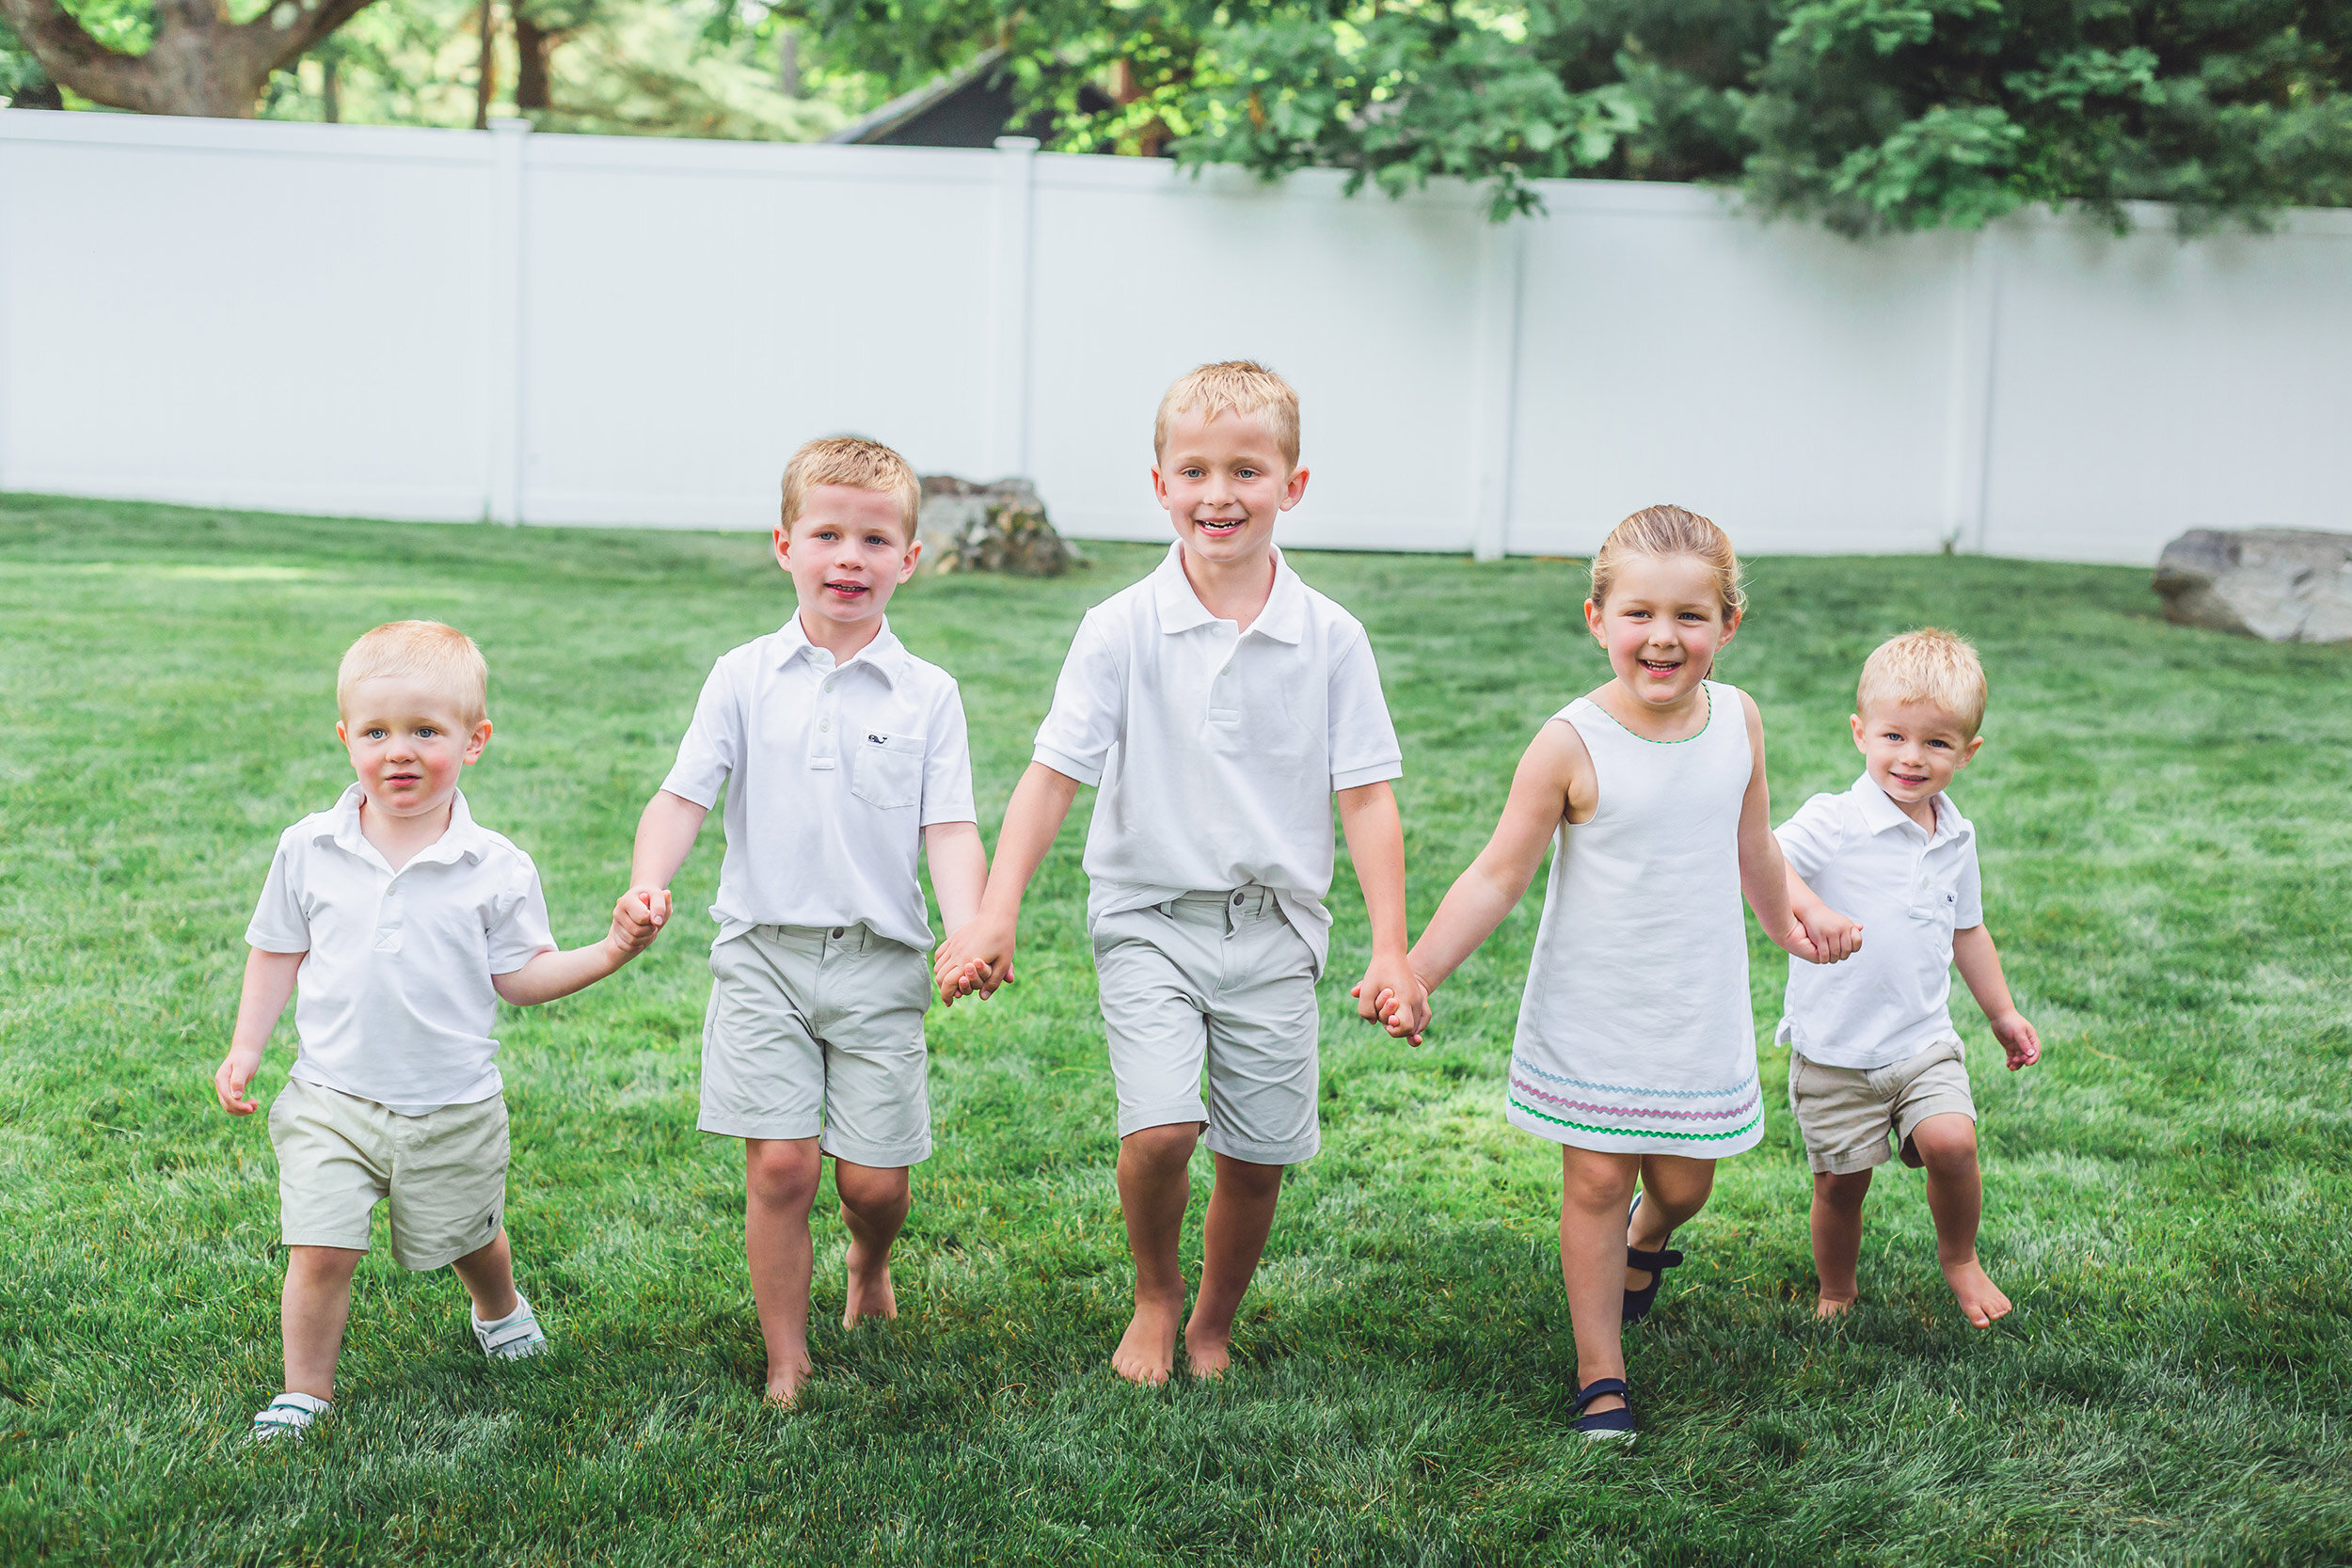 Portsmouth NH Family Portrait Session | Stephen Grant Photography